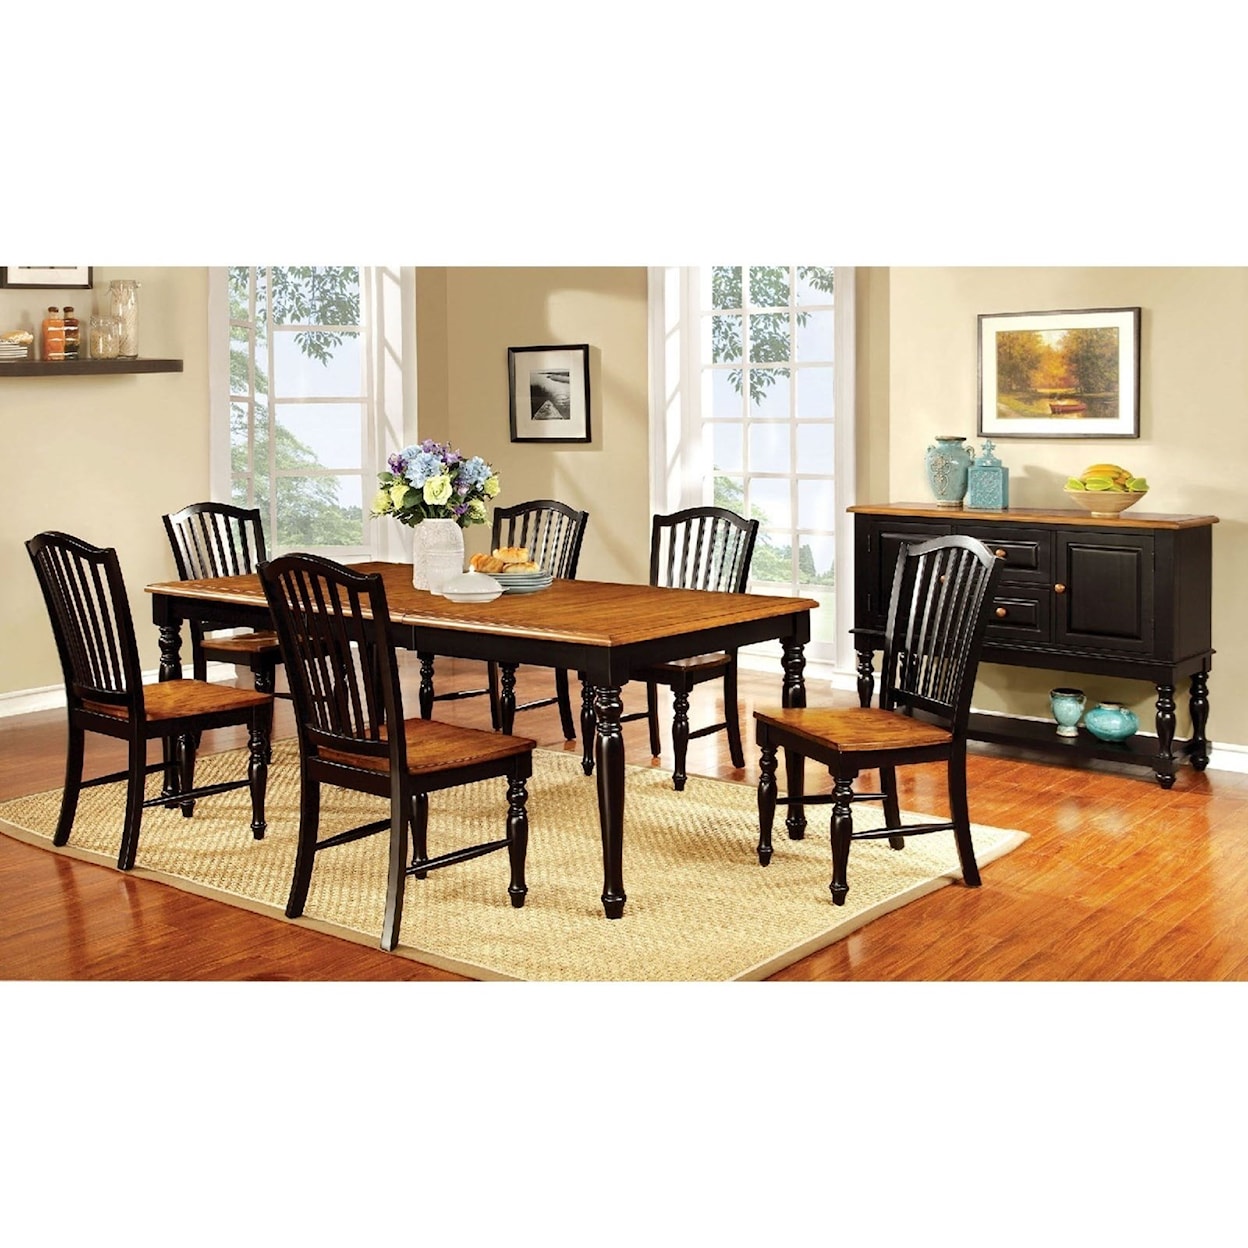 FUSA Mayville Table and 6 Chairs